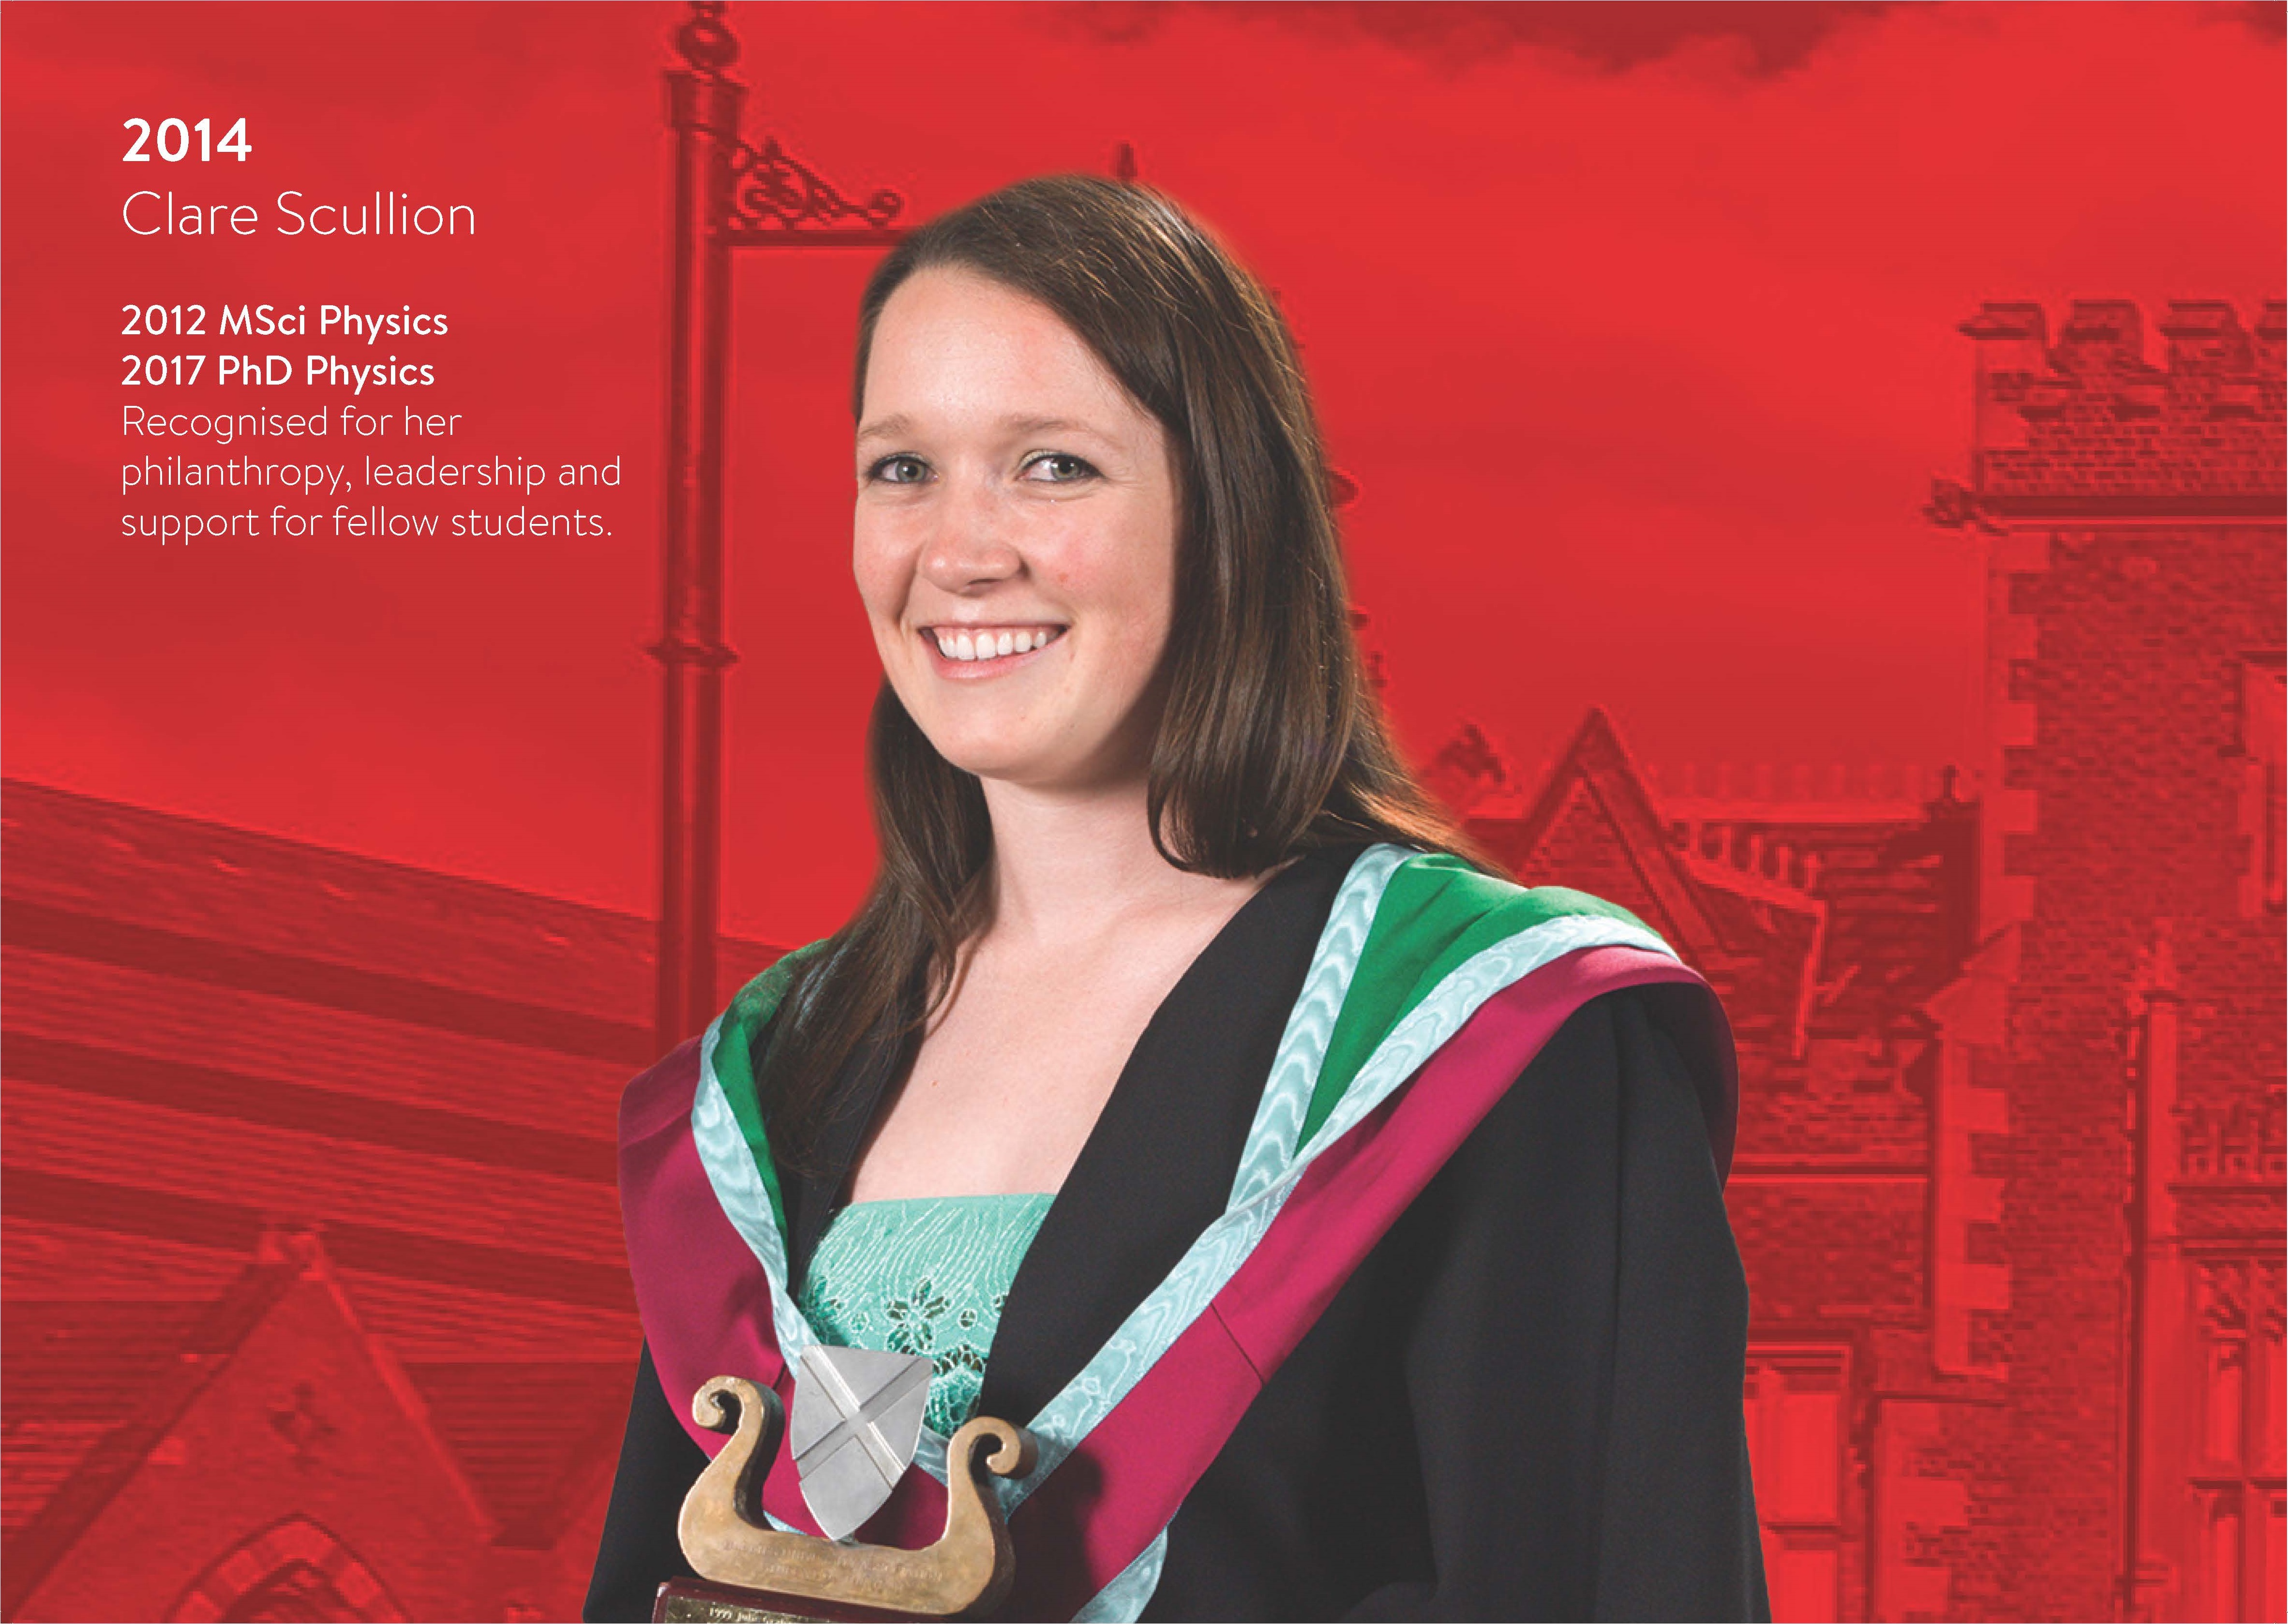 Photo of 2014 Student of the Year winner Clair Scullion in graduation gown with short biog